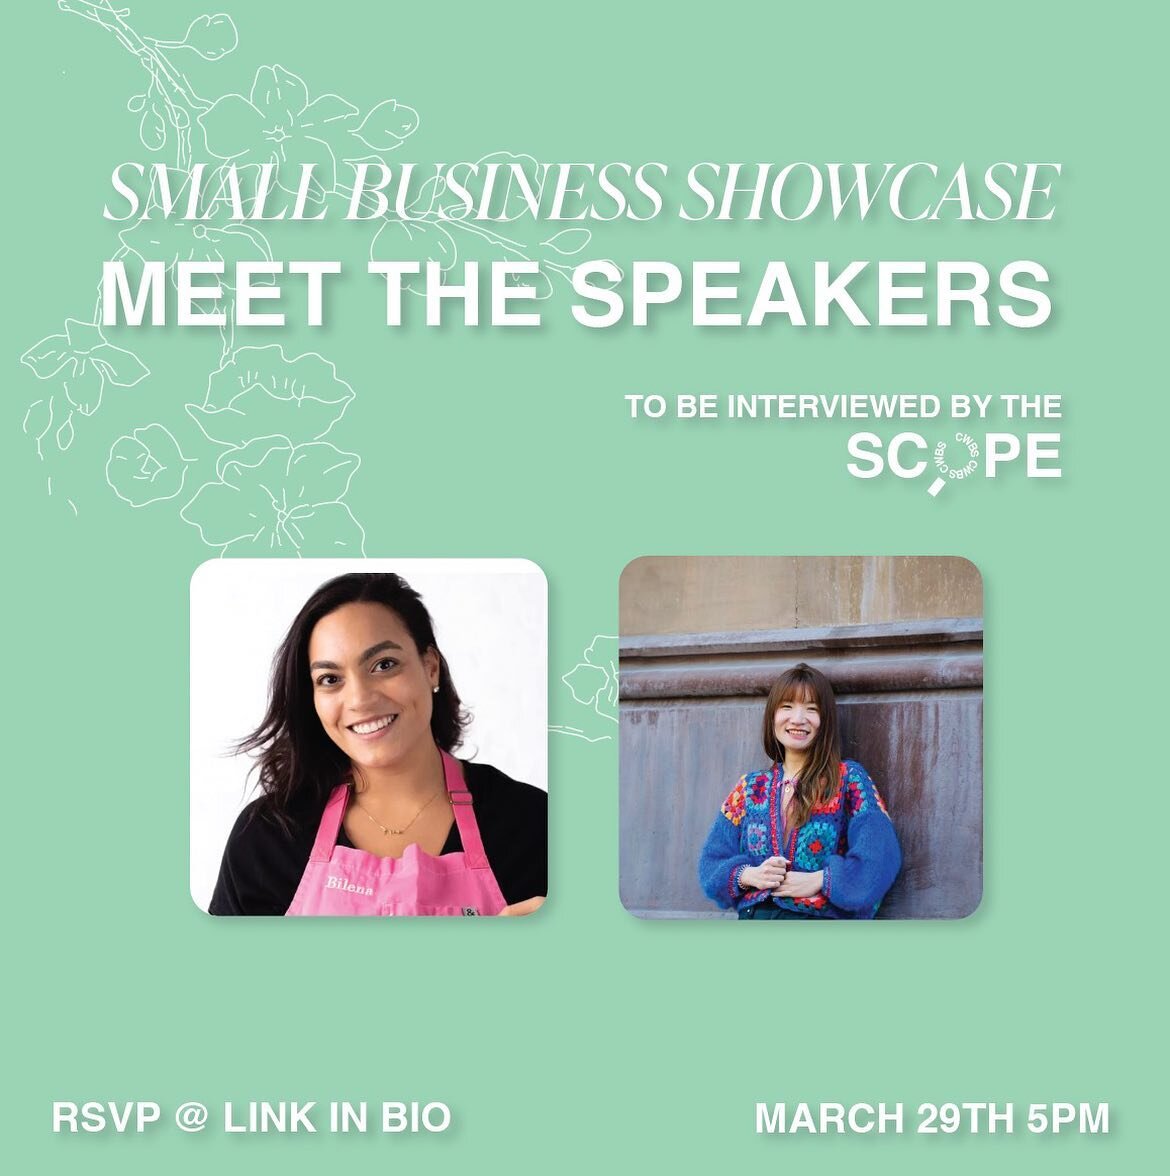 Looking for some inspiration on how to stand out in your industry? 💭 

Join us for the Small Business Showcase where we&rsquo;ll be shining a spotlight on two incredible entrepreneurs making waves in their respective fields!

Meet Bilena Settepani, 